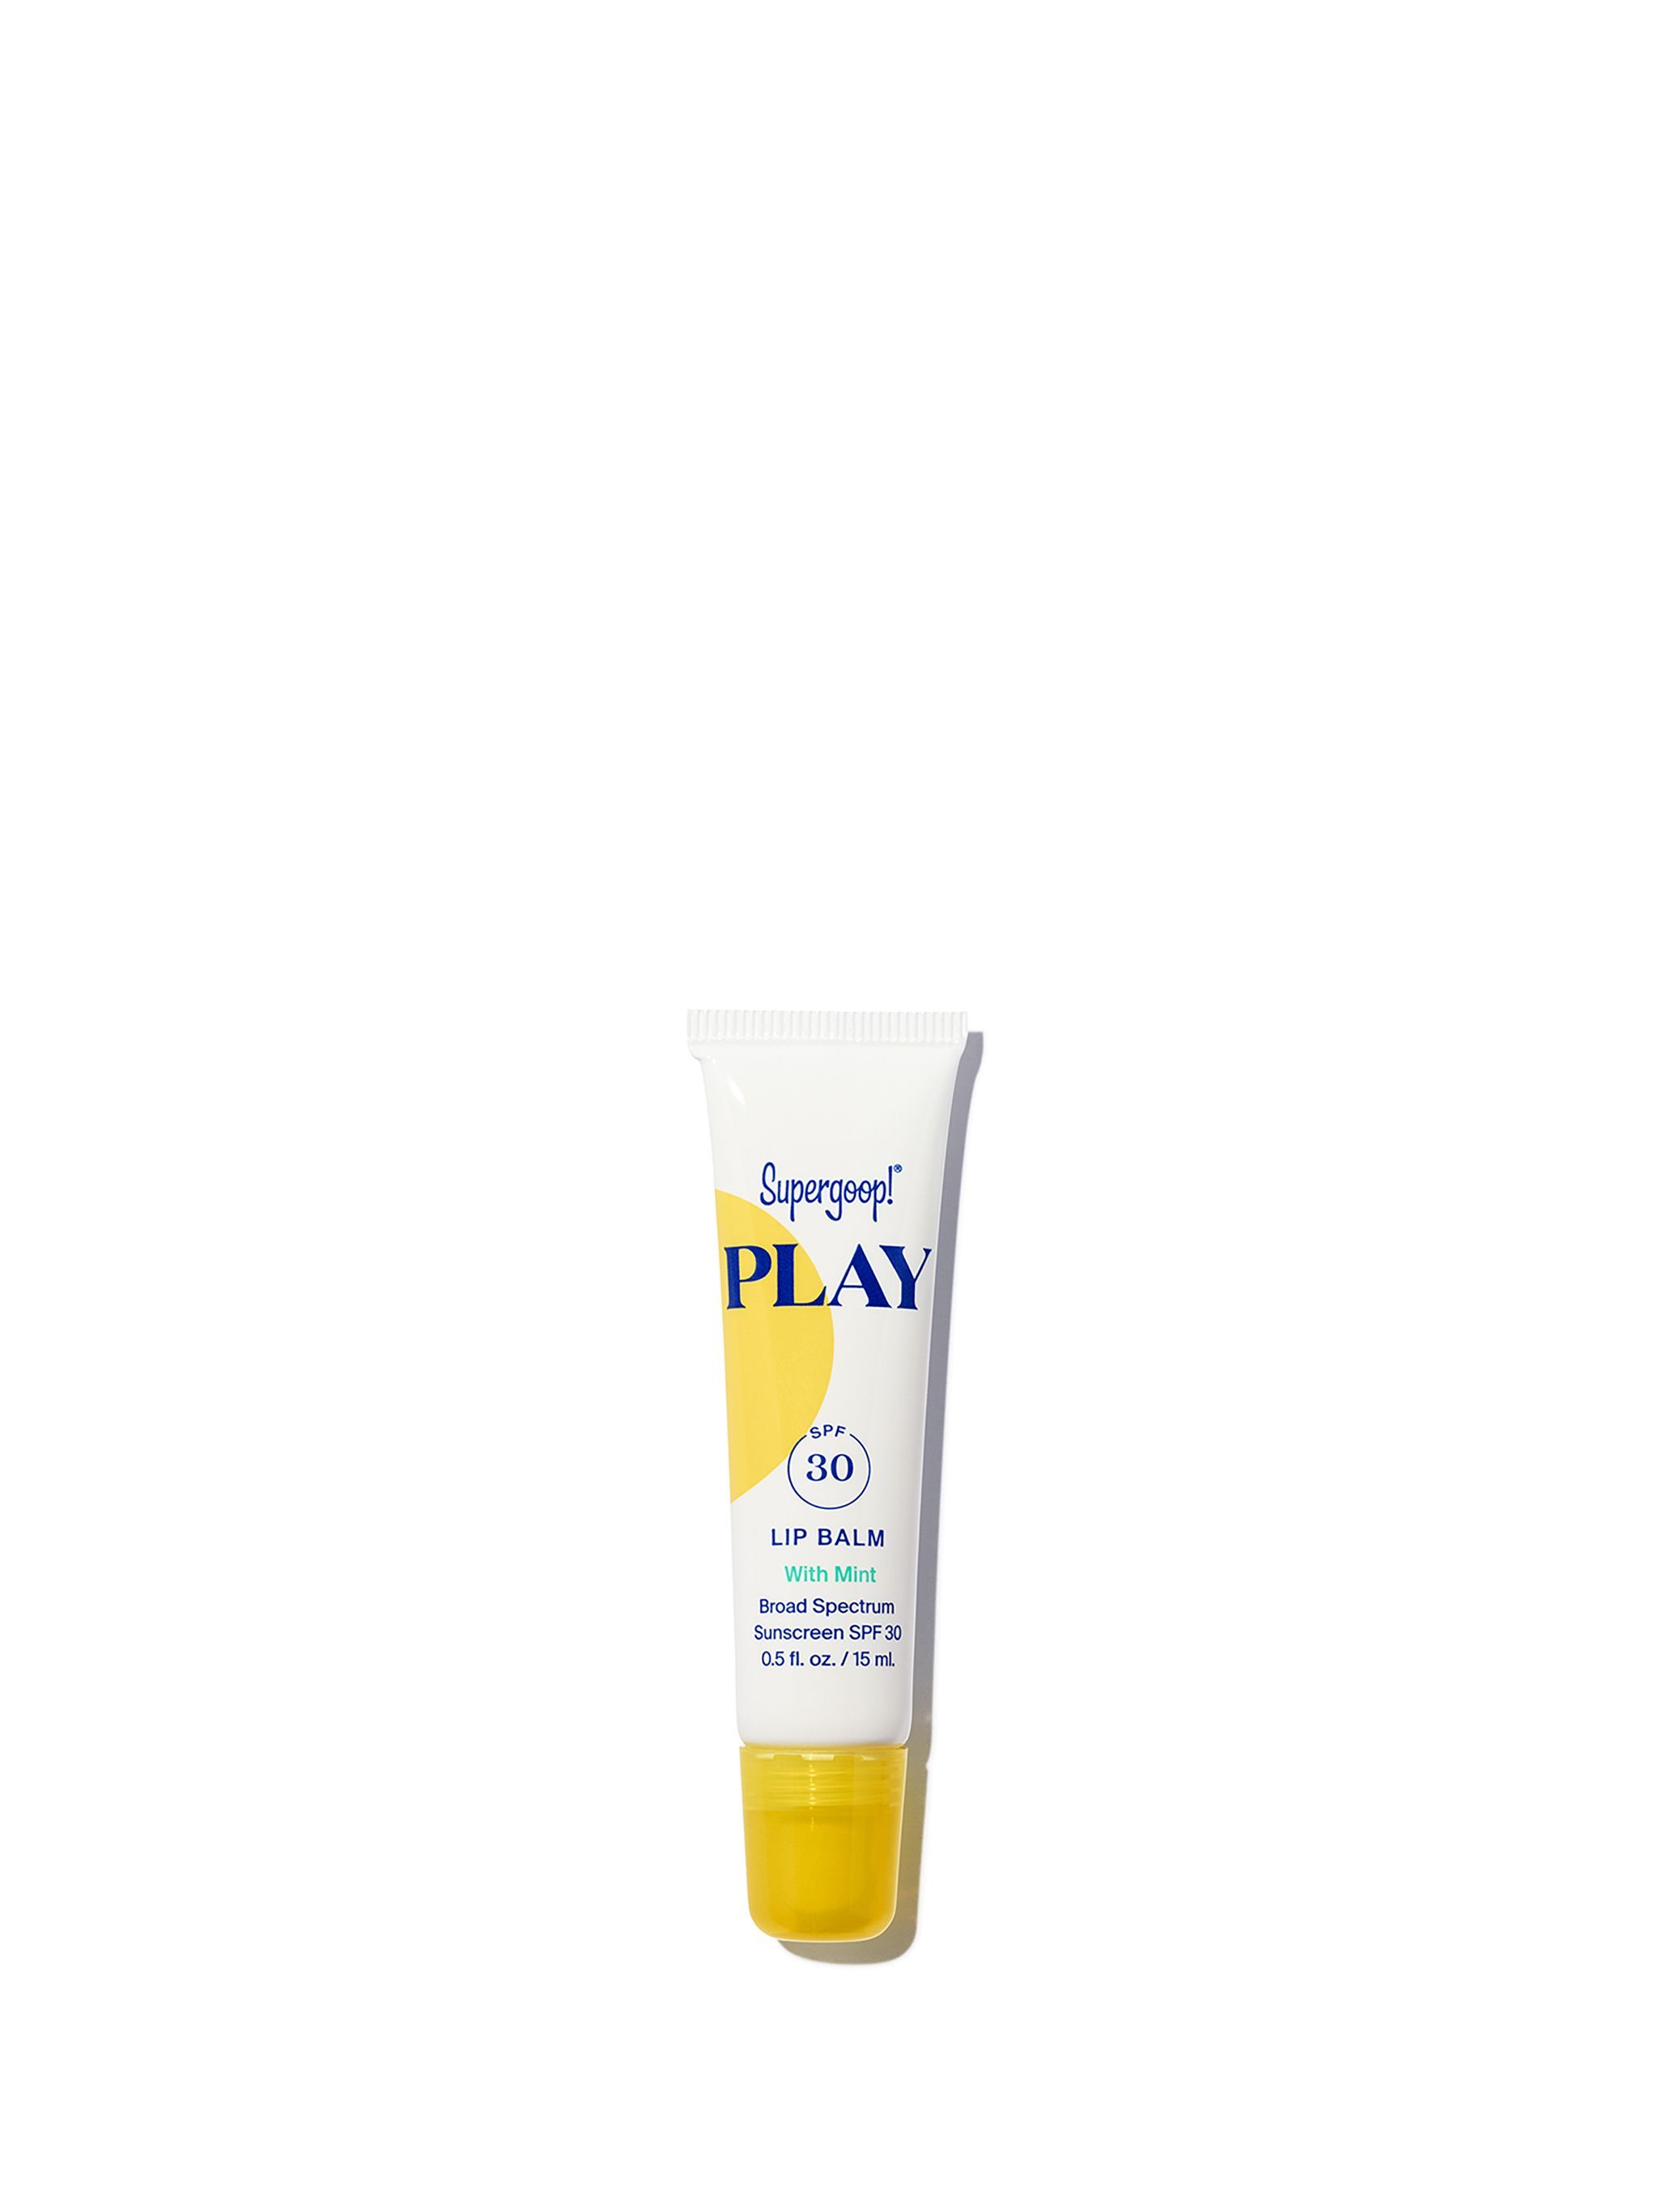 Supergoop!PLAY Lip Balm SPF 30 with Mint $12 | Violet Grey